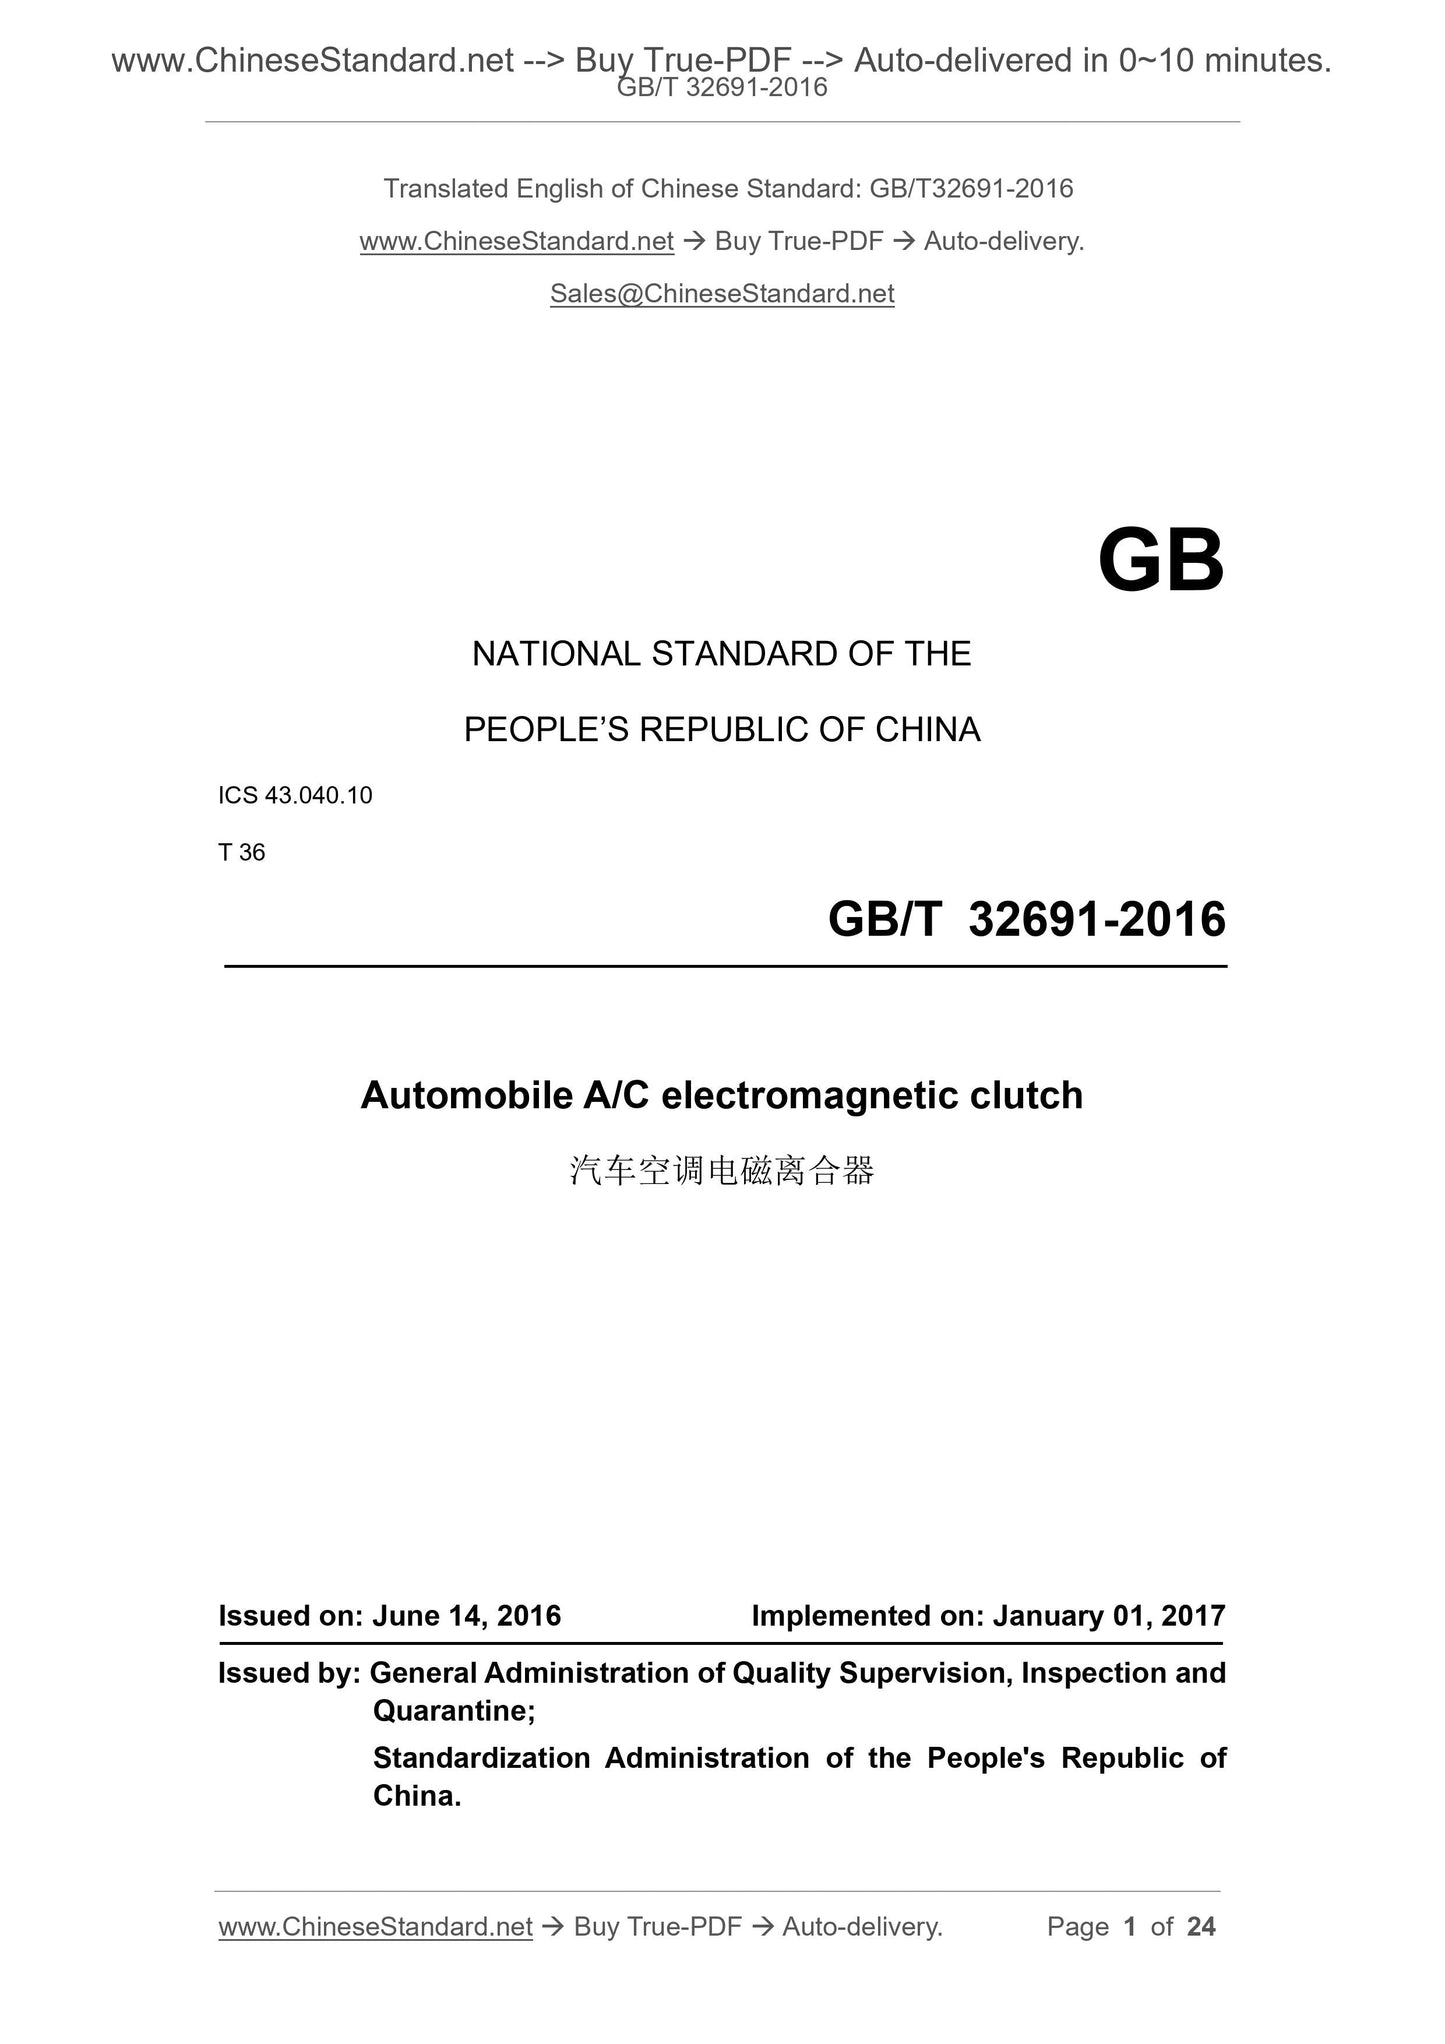 GB/T 32691-2016 Page 1